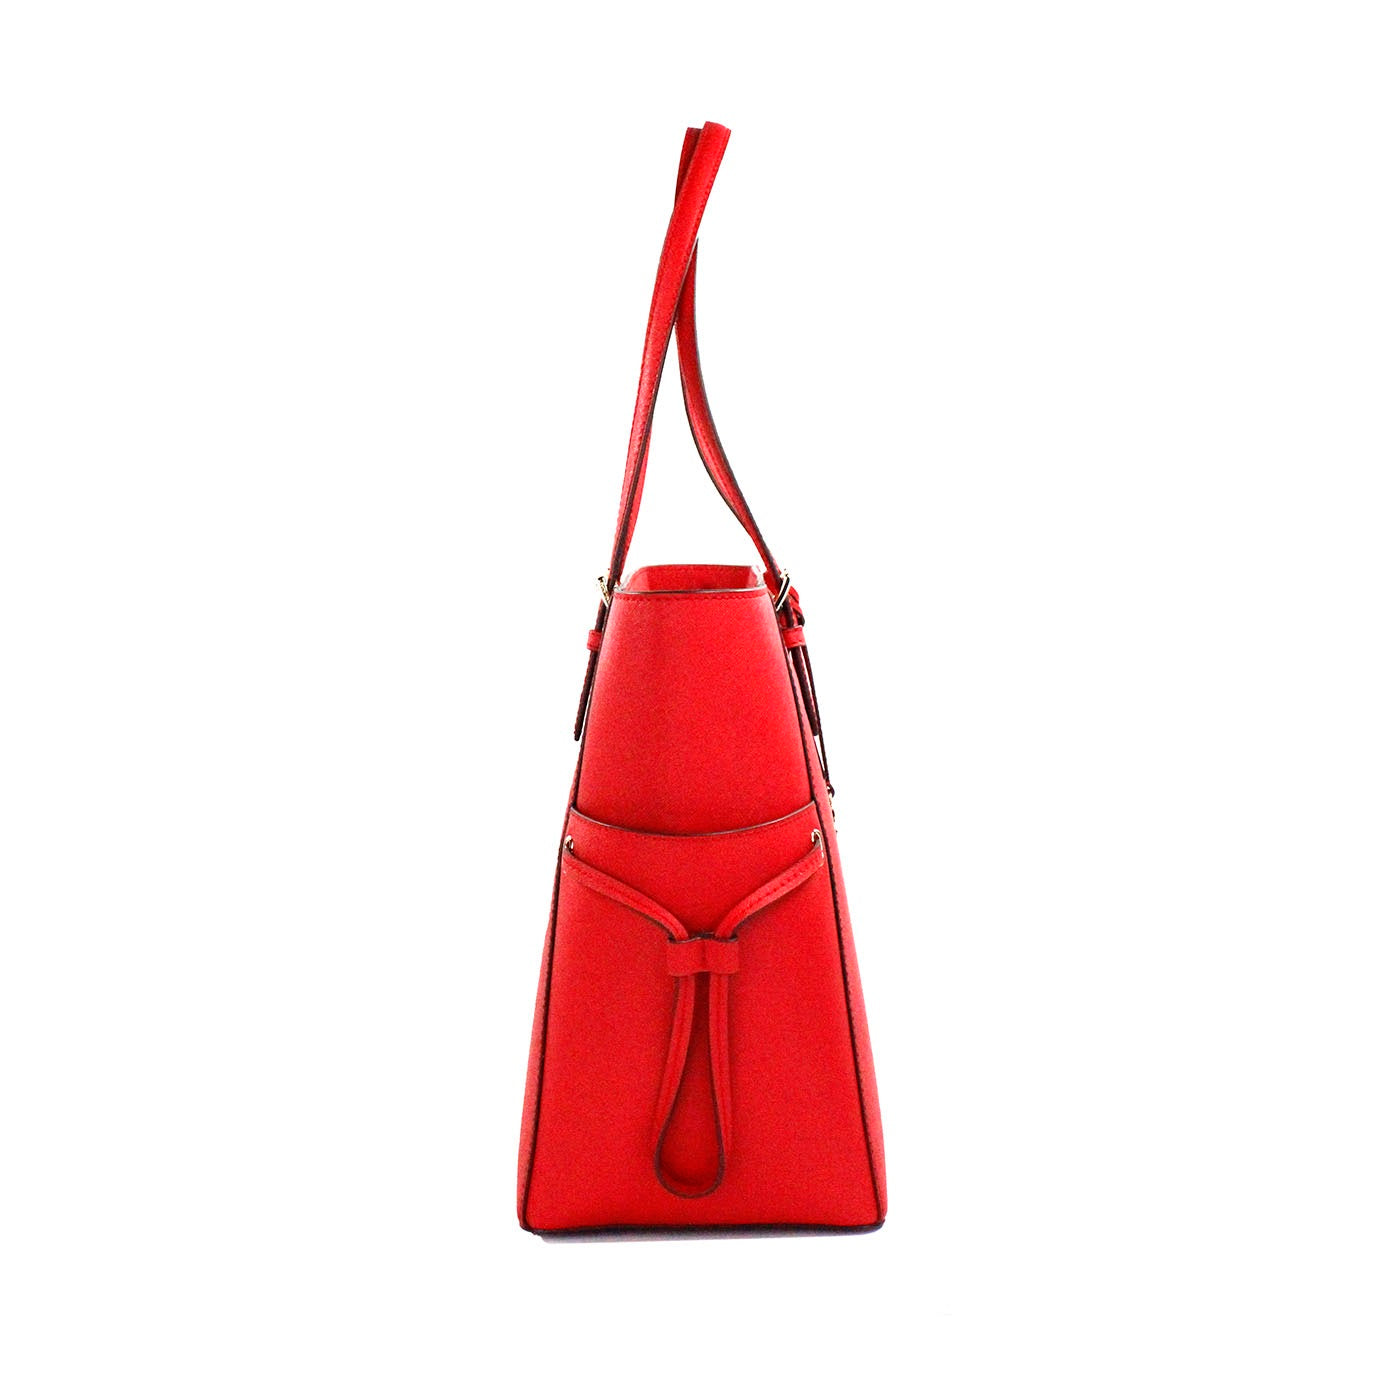 Gilly Large Bright Red Leather Drawstring Travel Tote Bag Purse - Divitiae Glamour